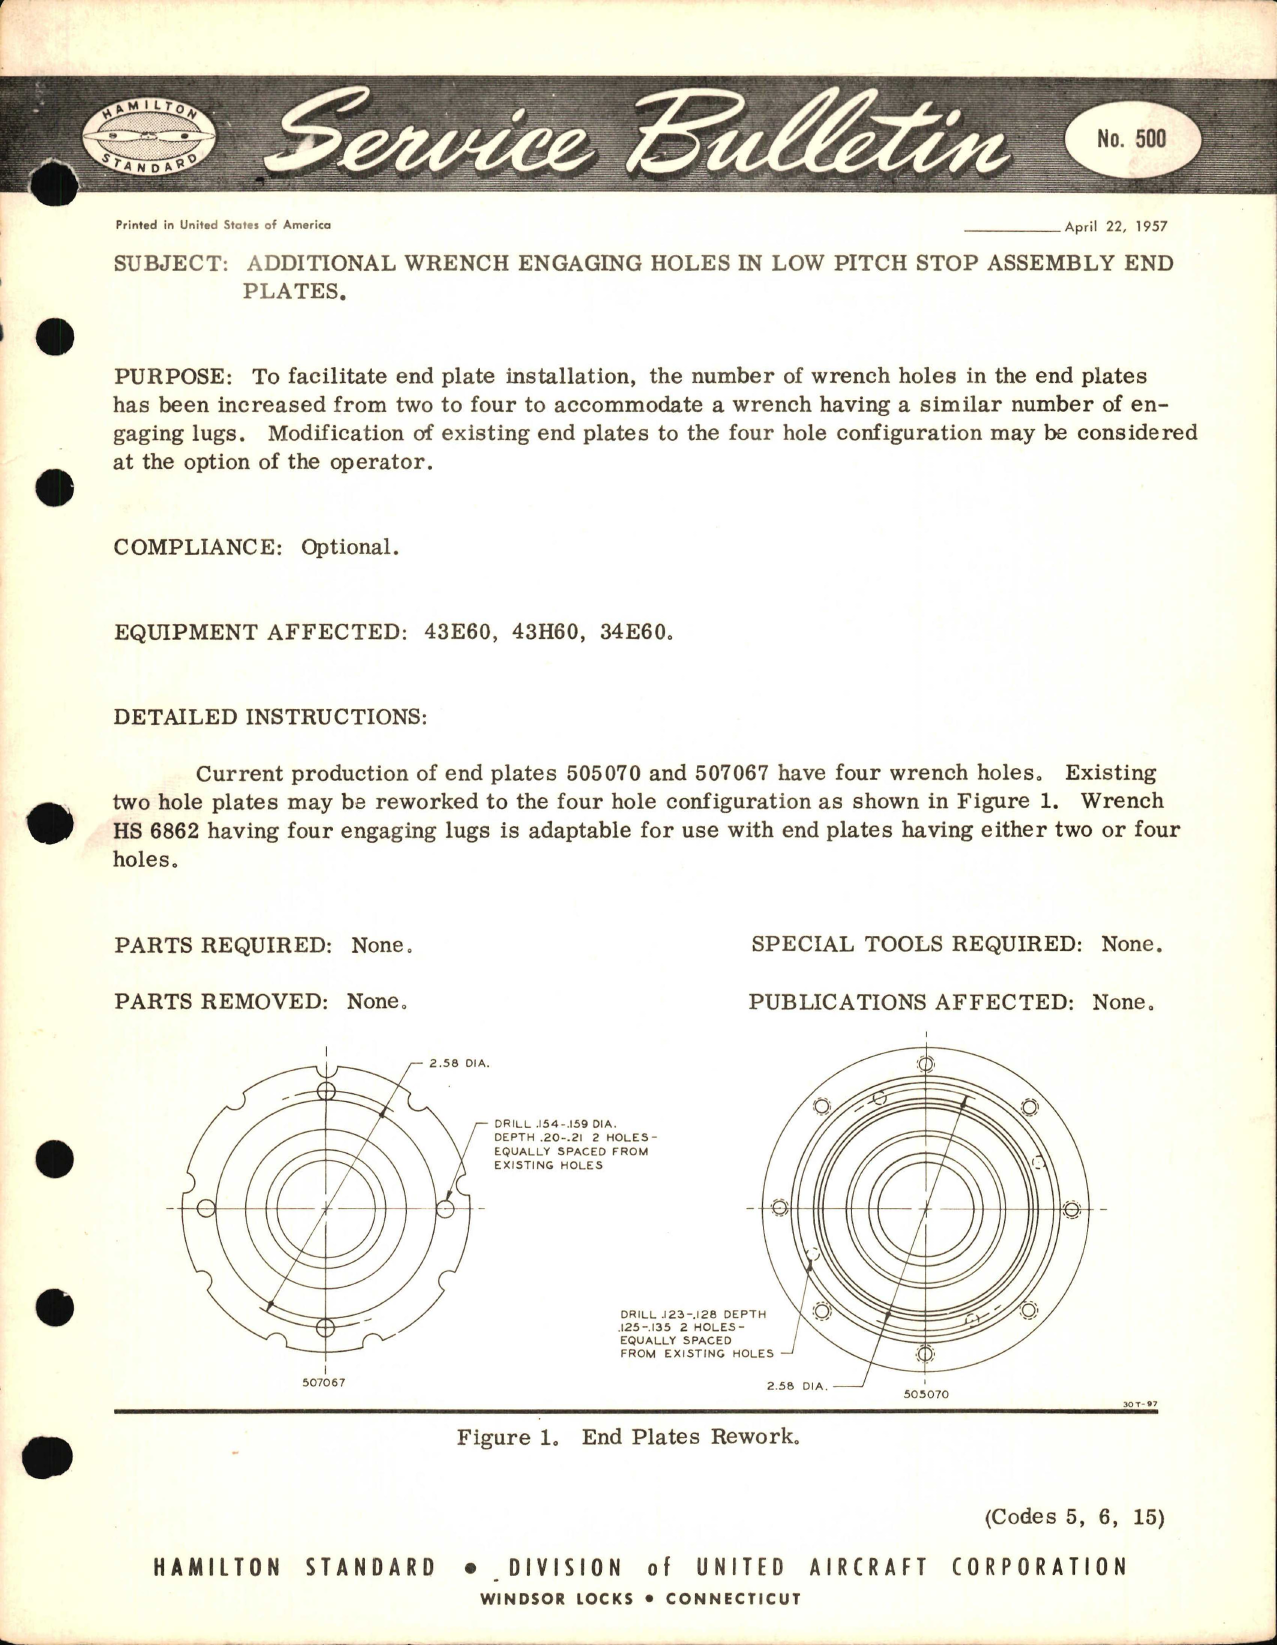 Sample page 1 from AirCorps Library document: Additional Wrench Engaging Holes in Low Pitch Stop Assembly End Plates